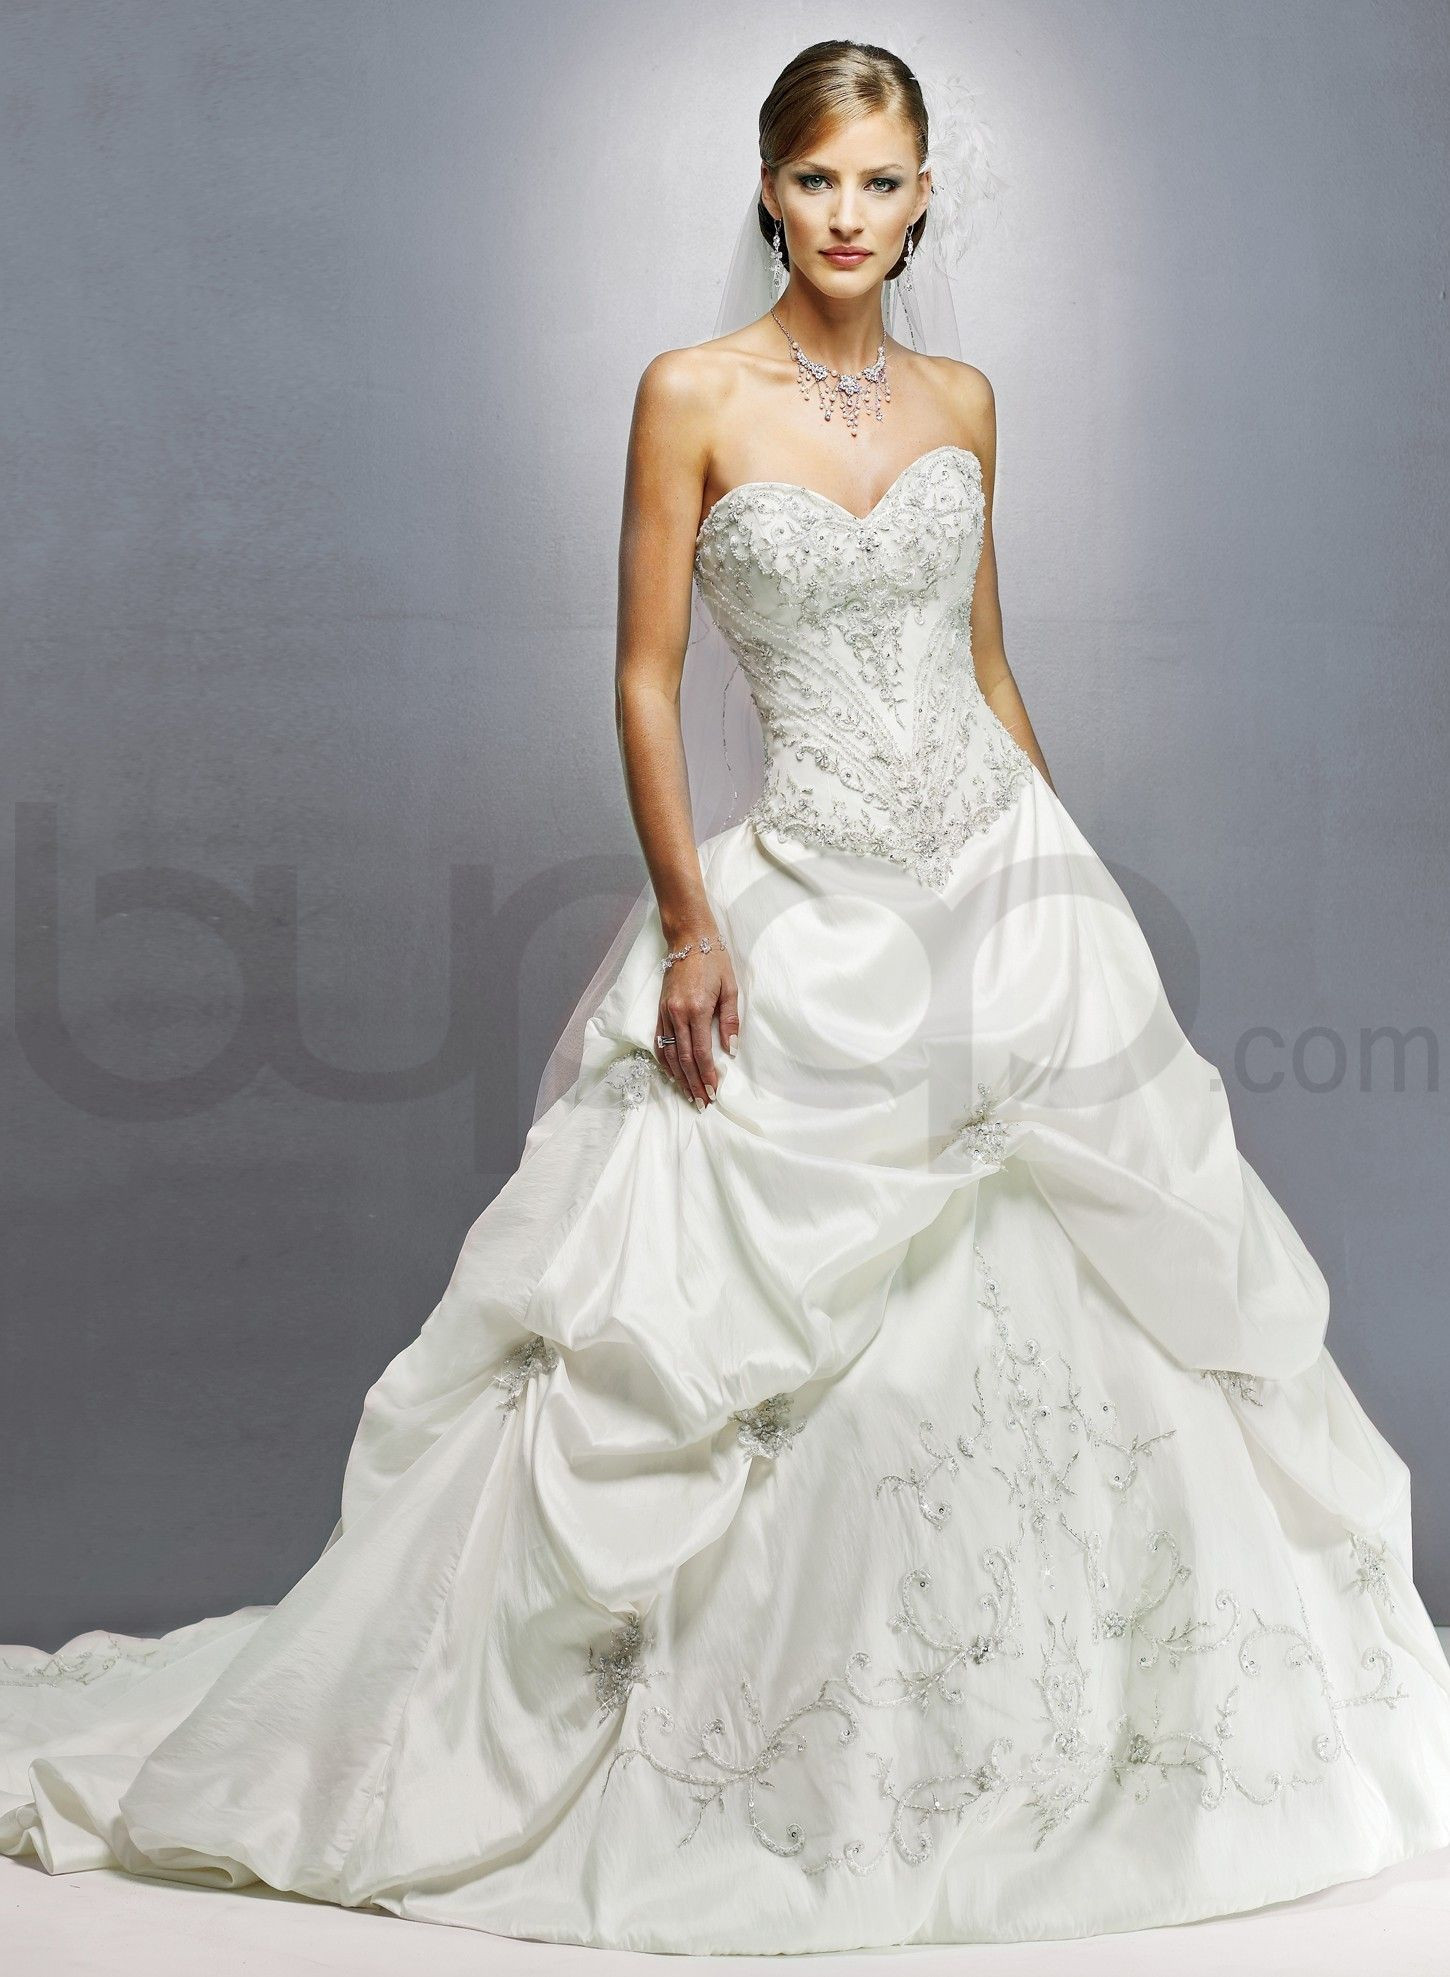 Sweetheart Wedding Gowns
 ivory wedding gowns with sweetheart necklines